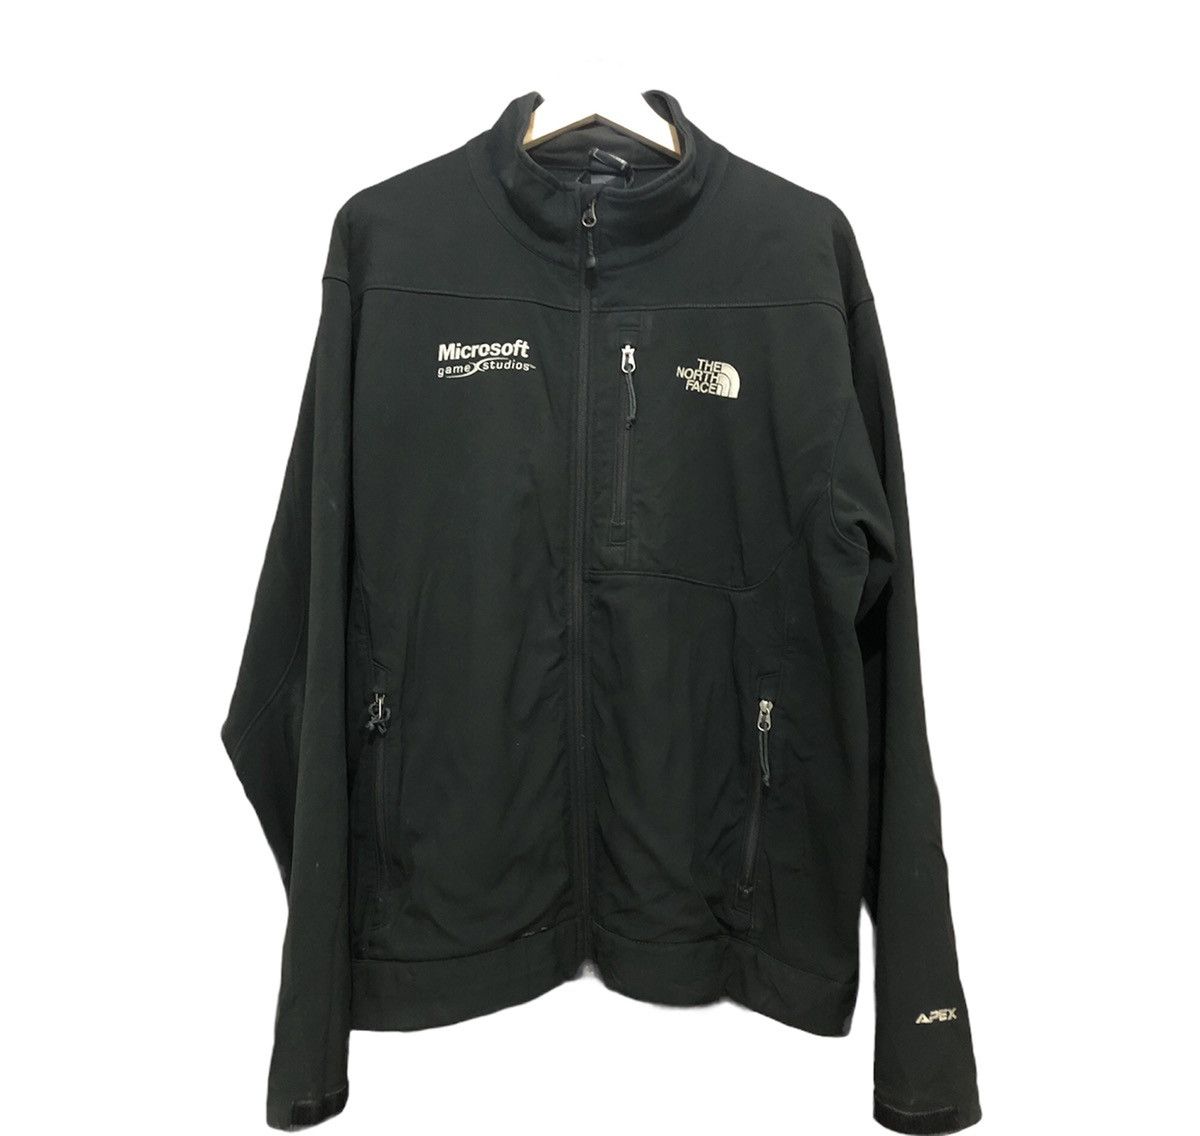 The North Face X Microsoft Game Studios Jacket 2007 - 1